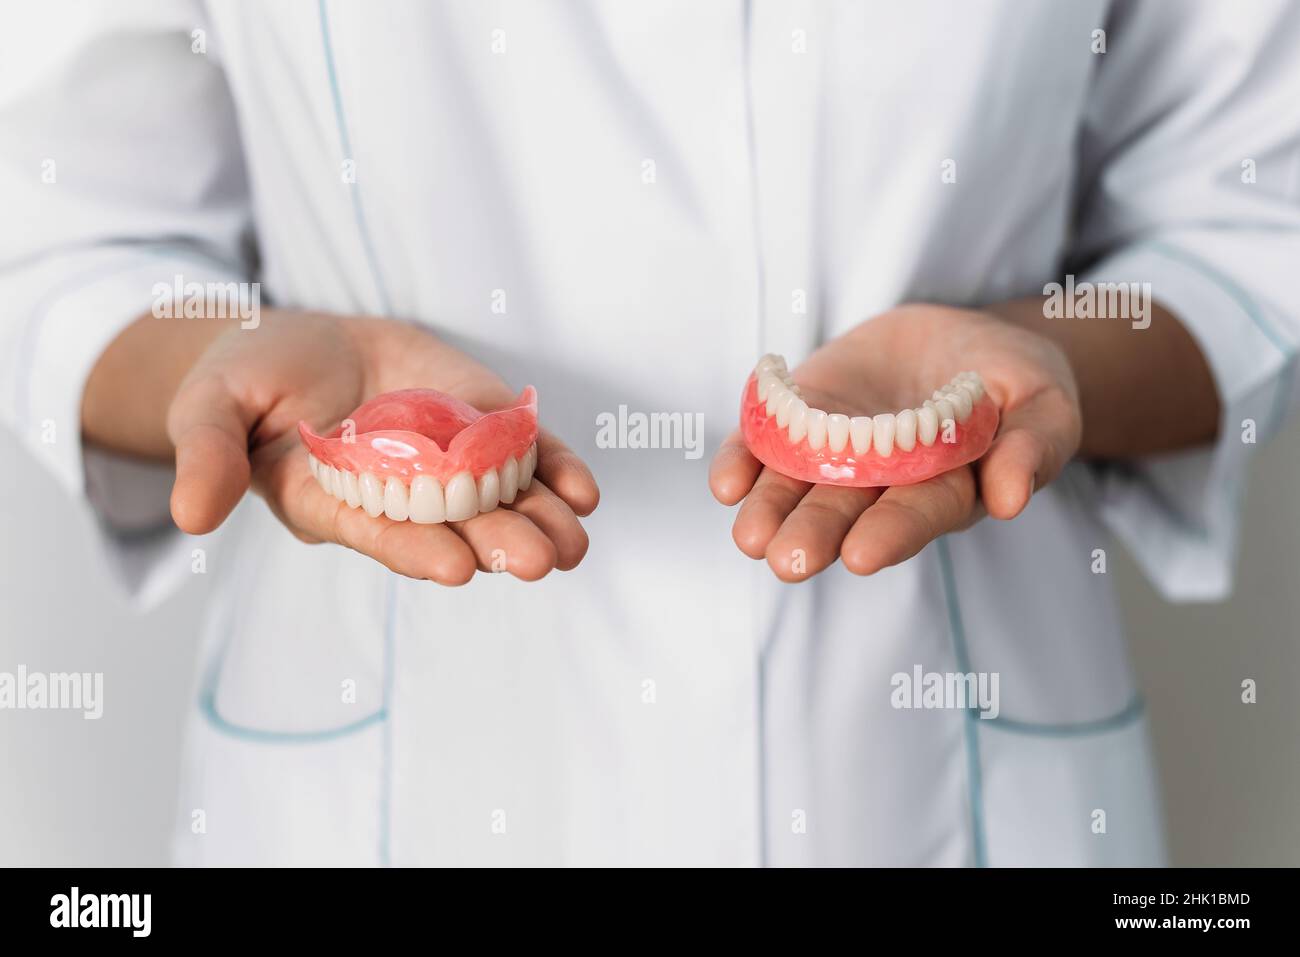 The dentist is holding dentures in his hands. Dental prosthesis in the hands of the doctor close-up. Front view of complete denture. Dentistry concept Stock Photo